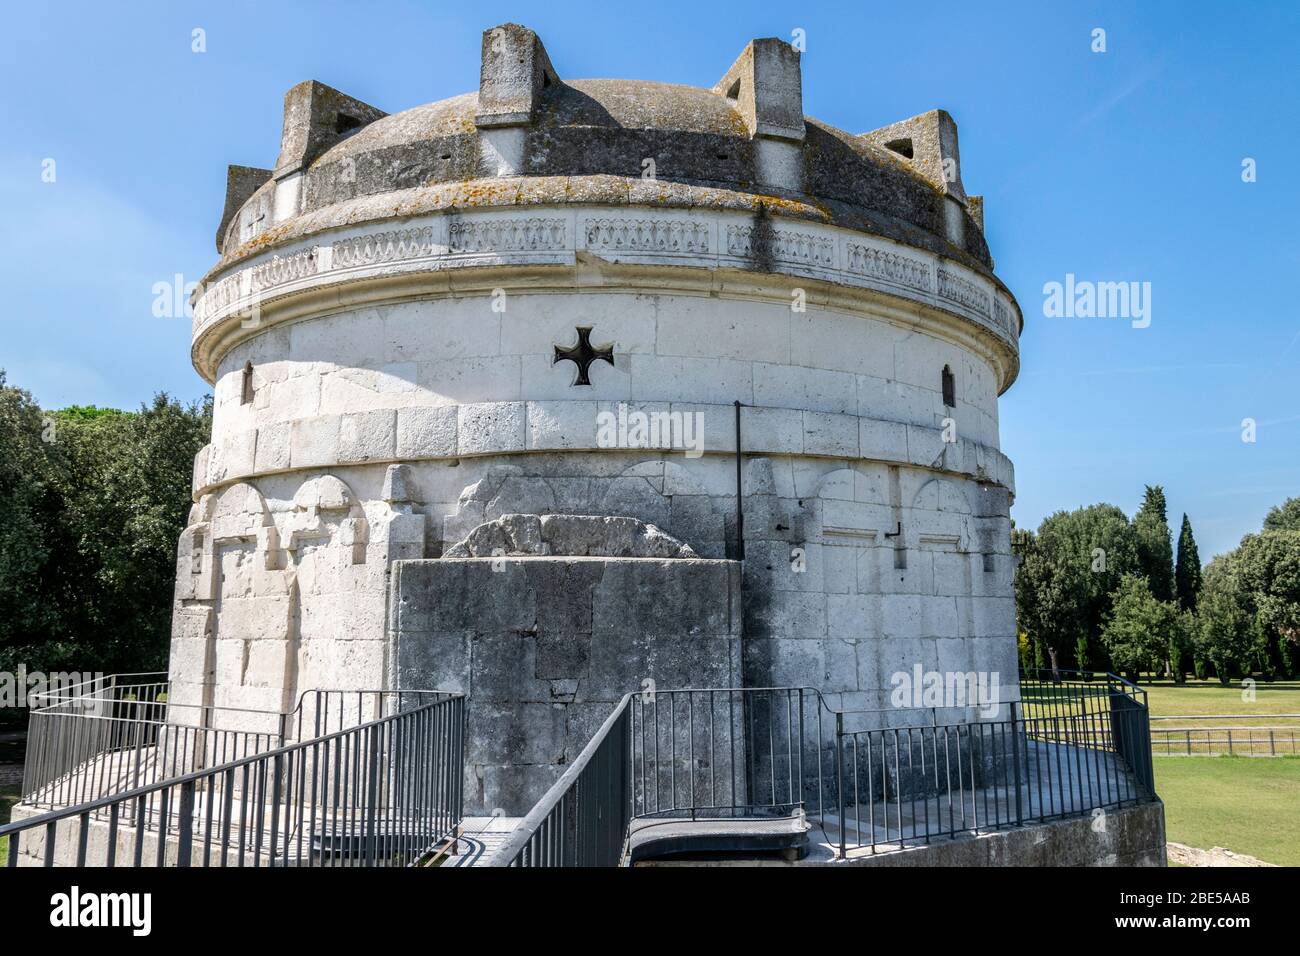 The Mausoleum of Theodoric, an example of Palaeo-Christian architecture in Ravenna, Italy Stock Photo